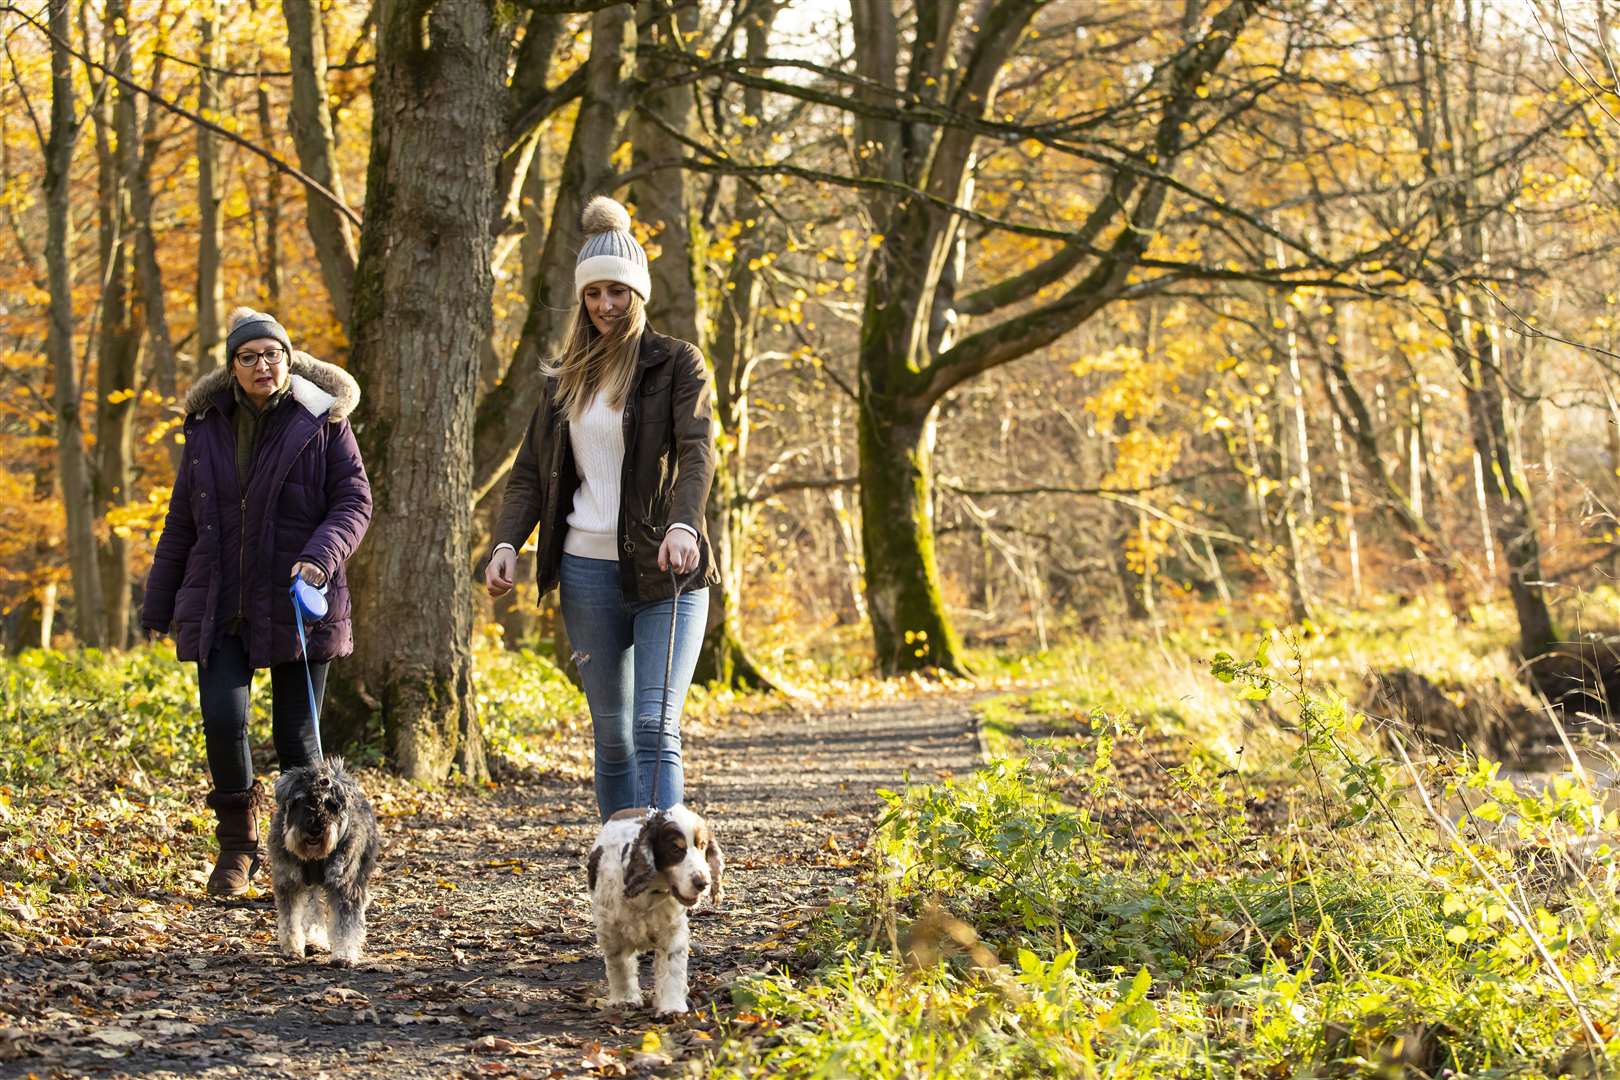 There are still some sites where you can enjoy a walk Picture: National Trust/Chris Lacey